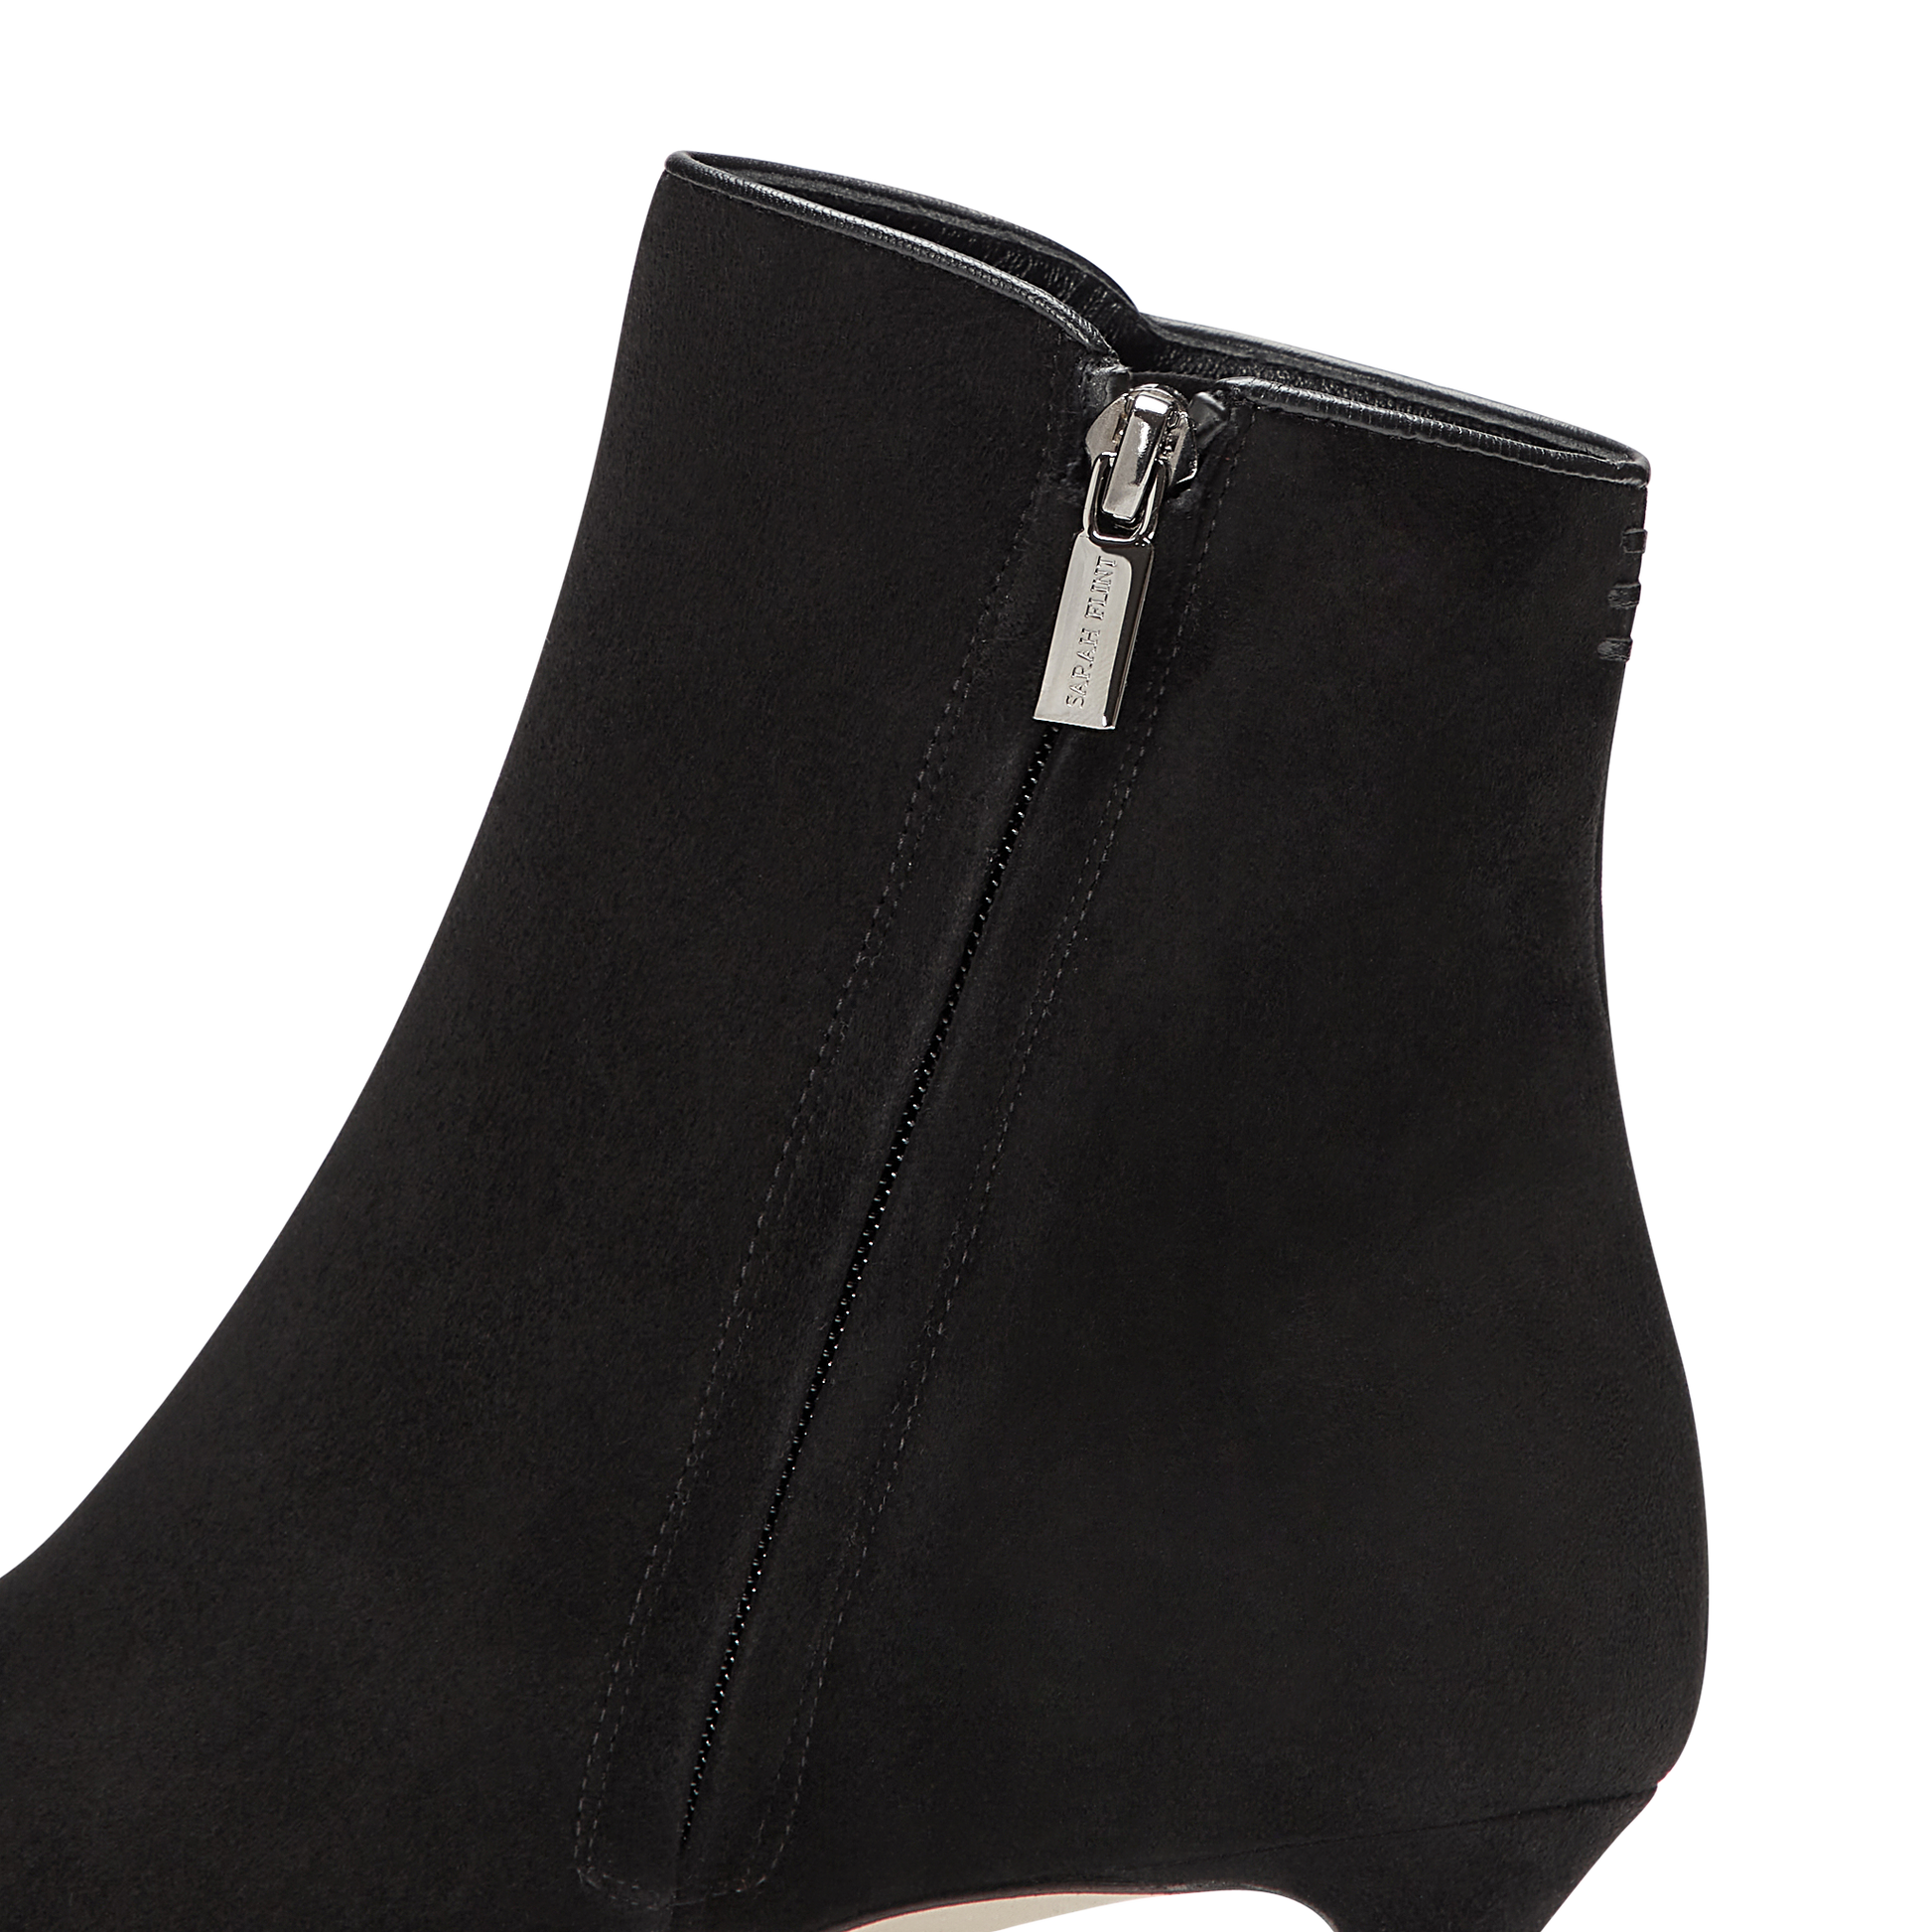 60mm Pointed Toe Perfect Dress Bootie Black Suede 